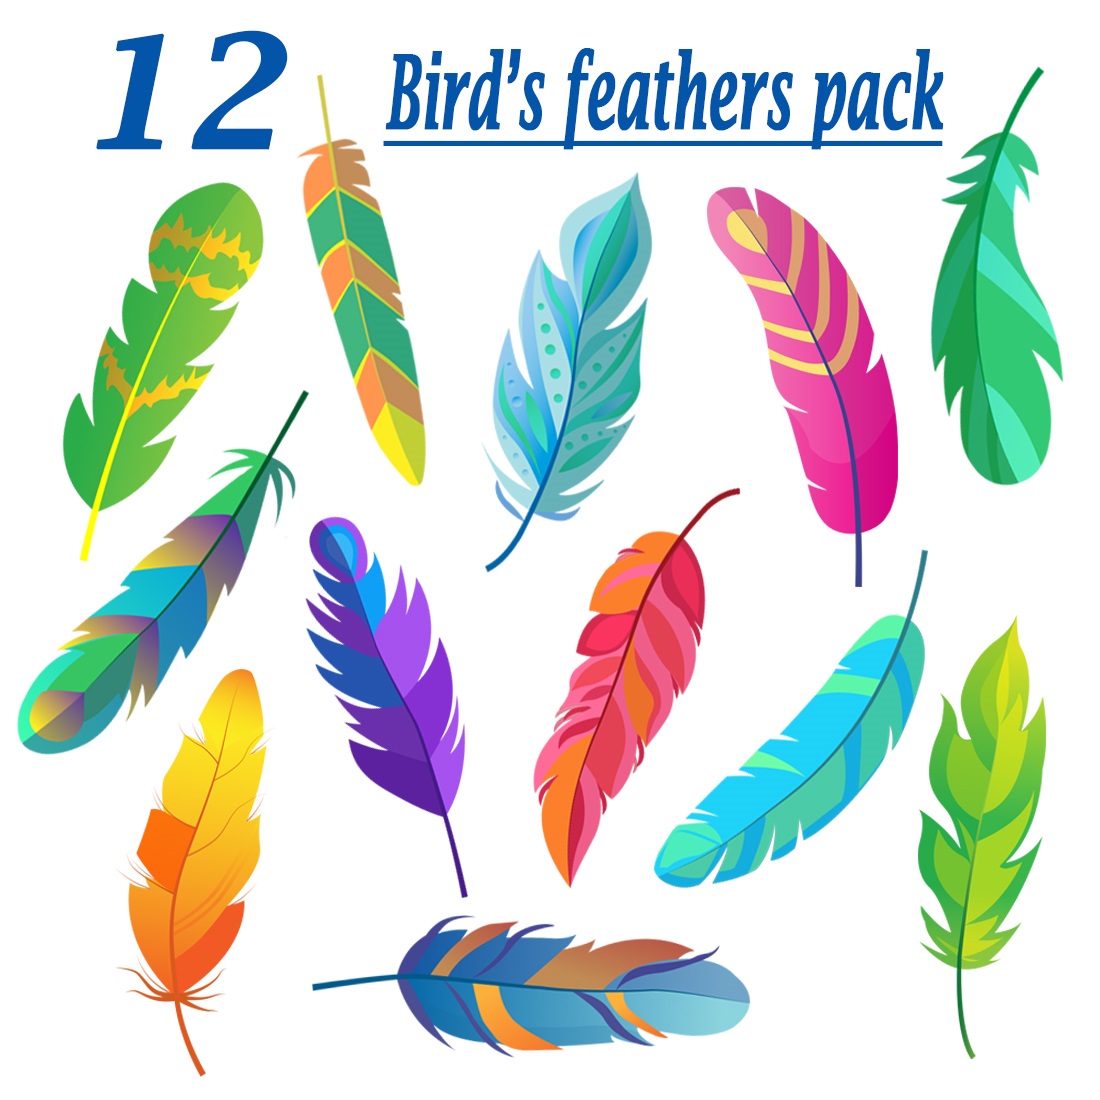 12 Colorful Bird's Feathers Flat Item Set cover image.